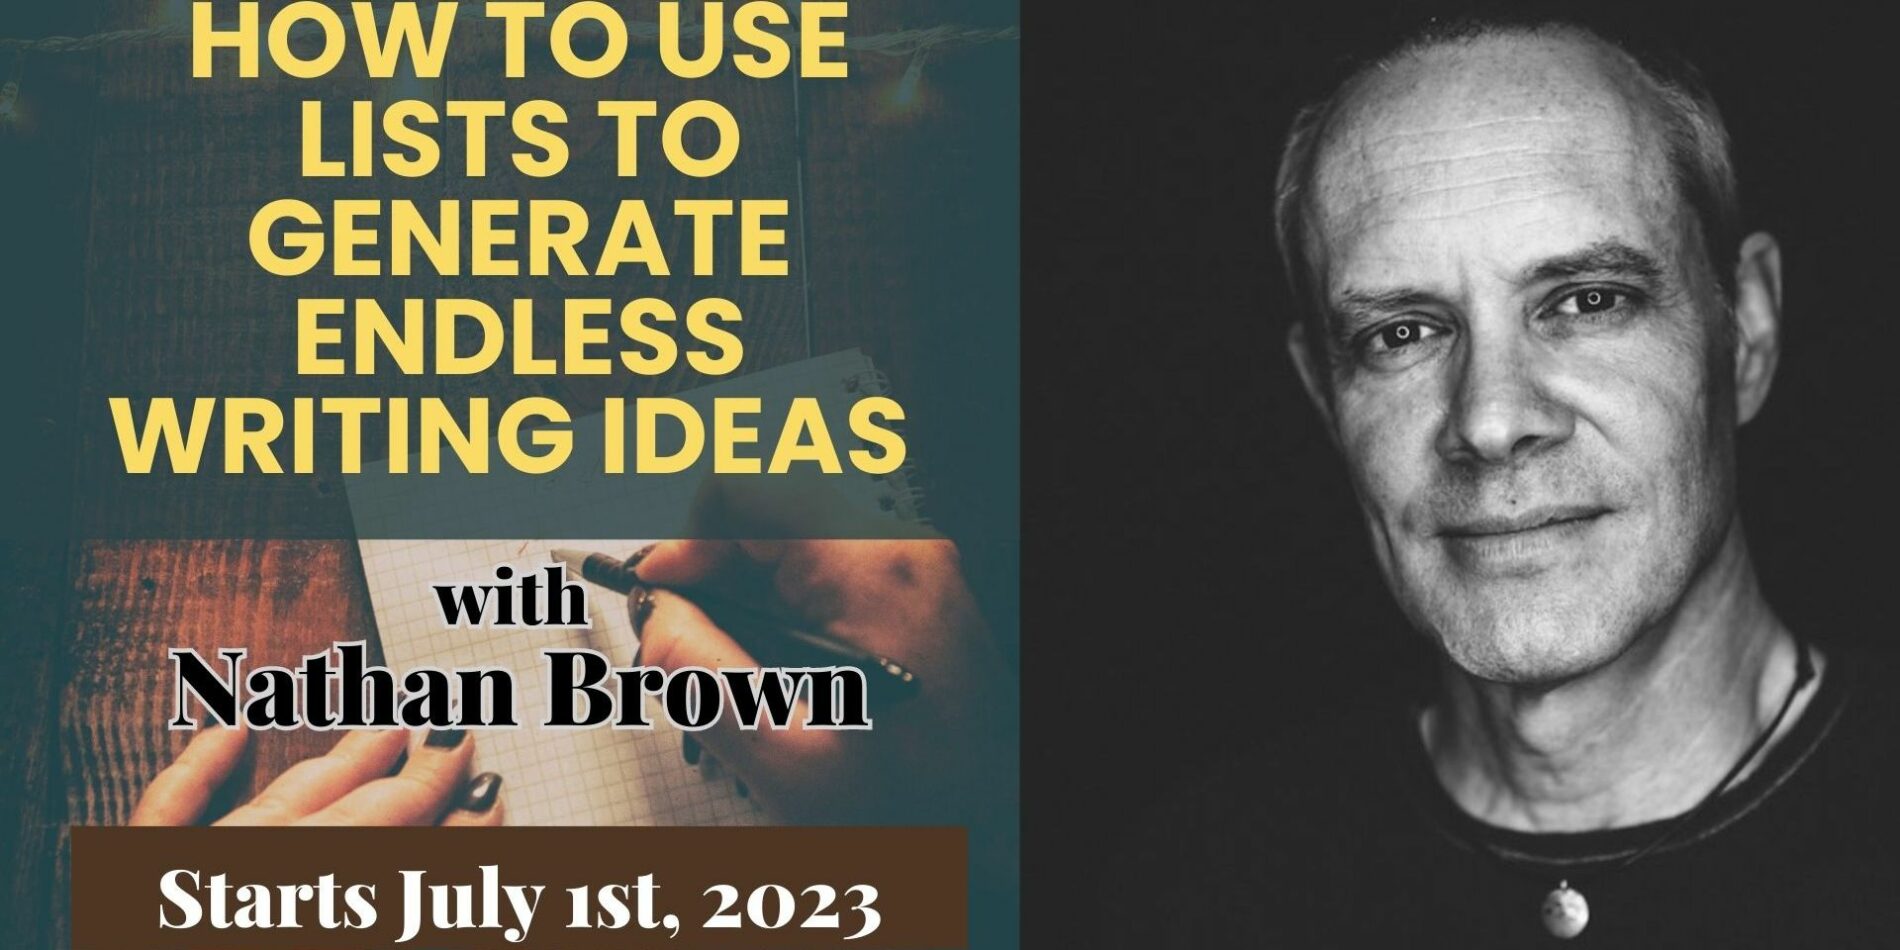 How to Use Lists to Generate Endless Writing Ideas with Nathan Brown